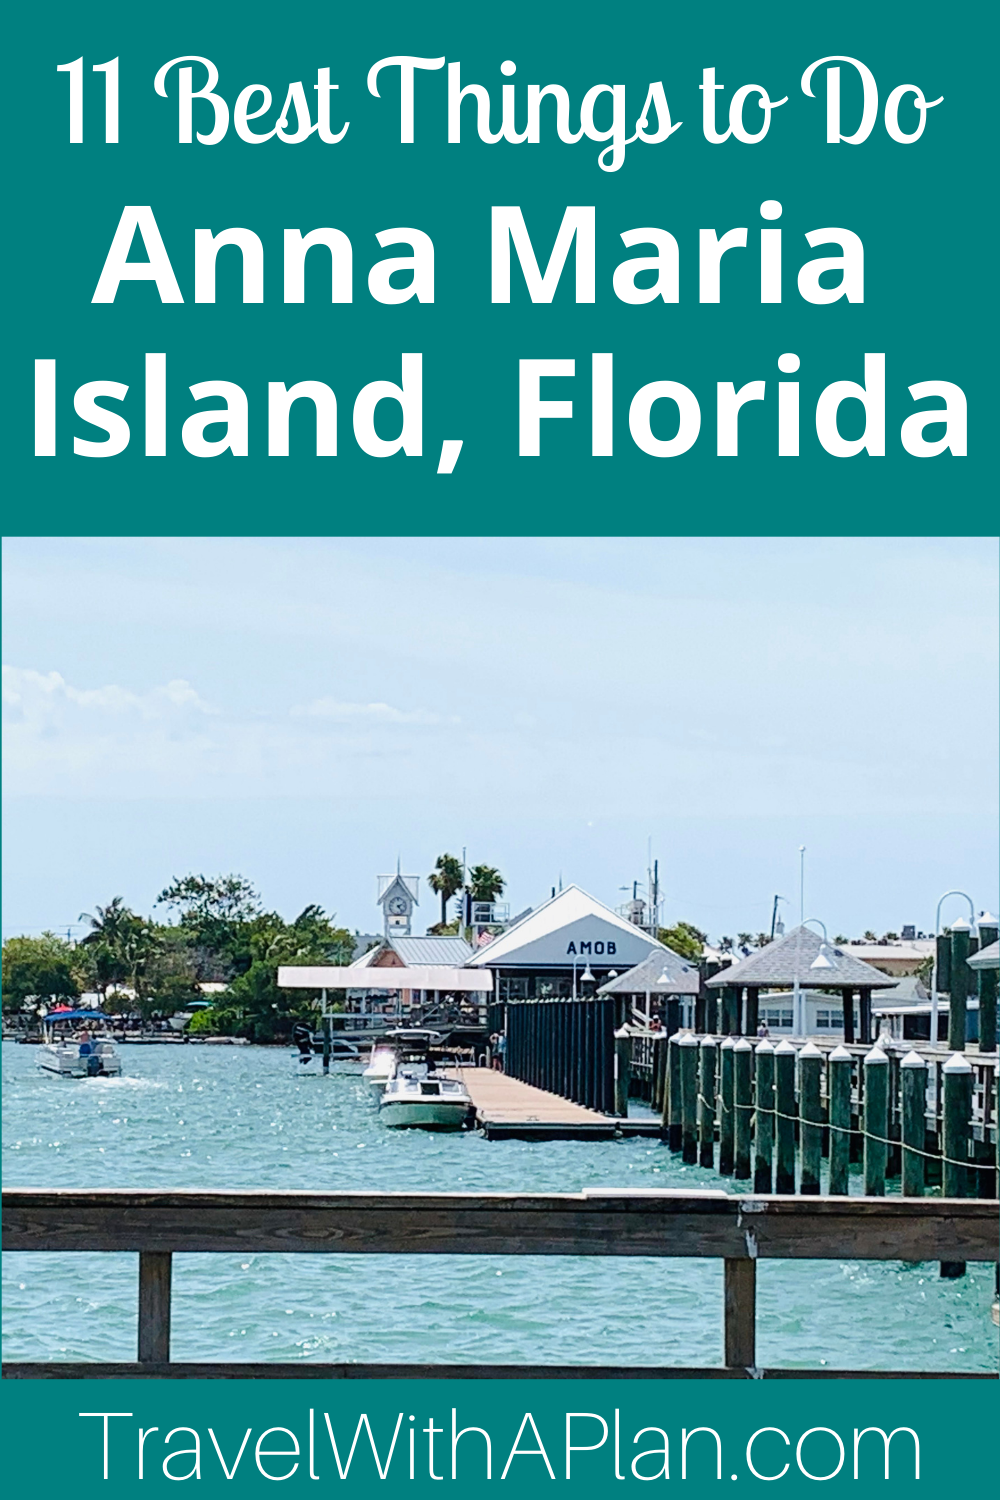 Discover the best things to do on Anna Maria Island from Top US Family Travel Blog, Travel With A Plan!